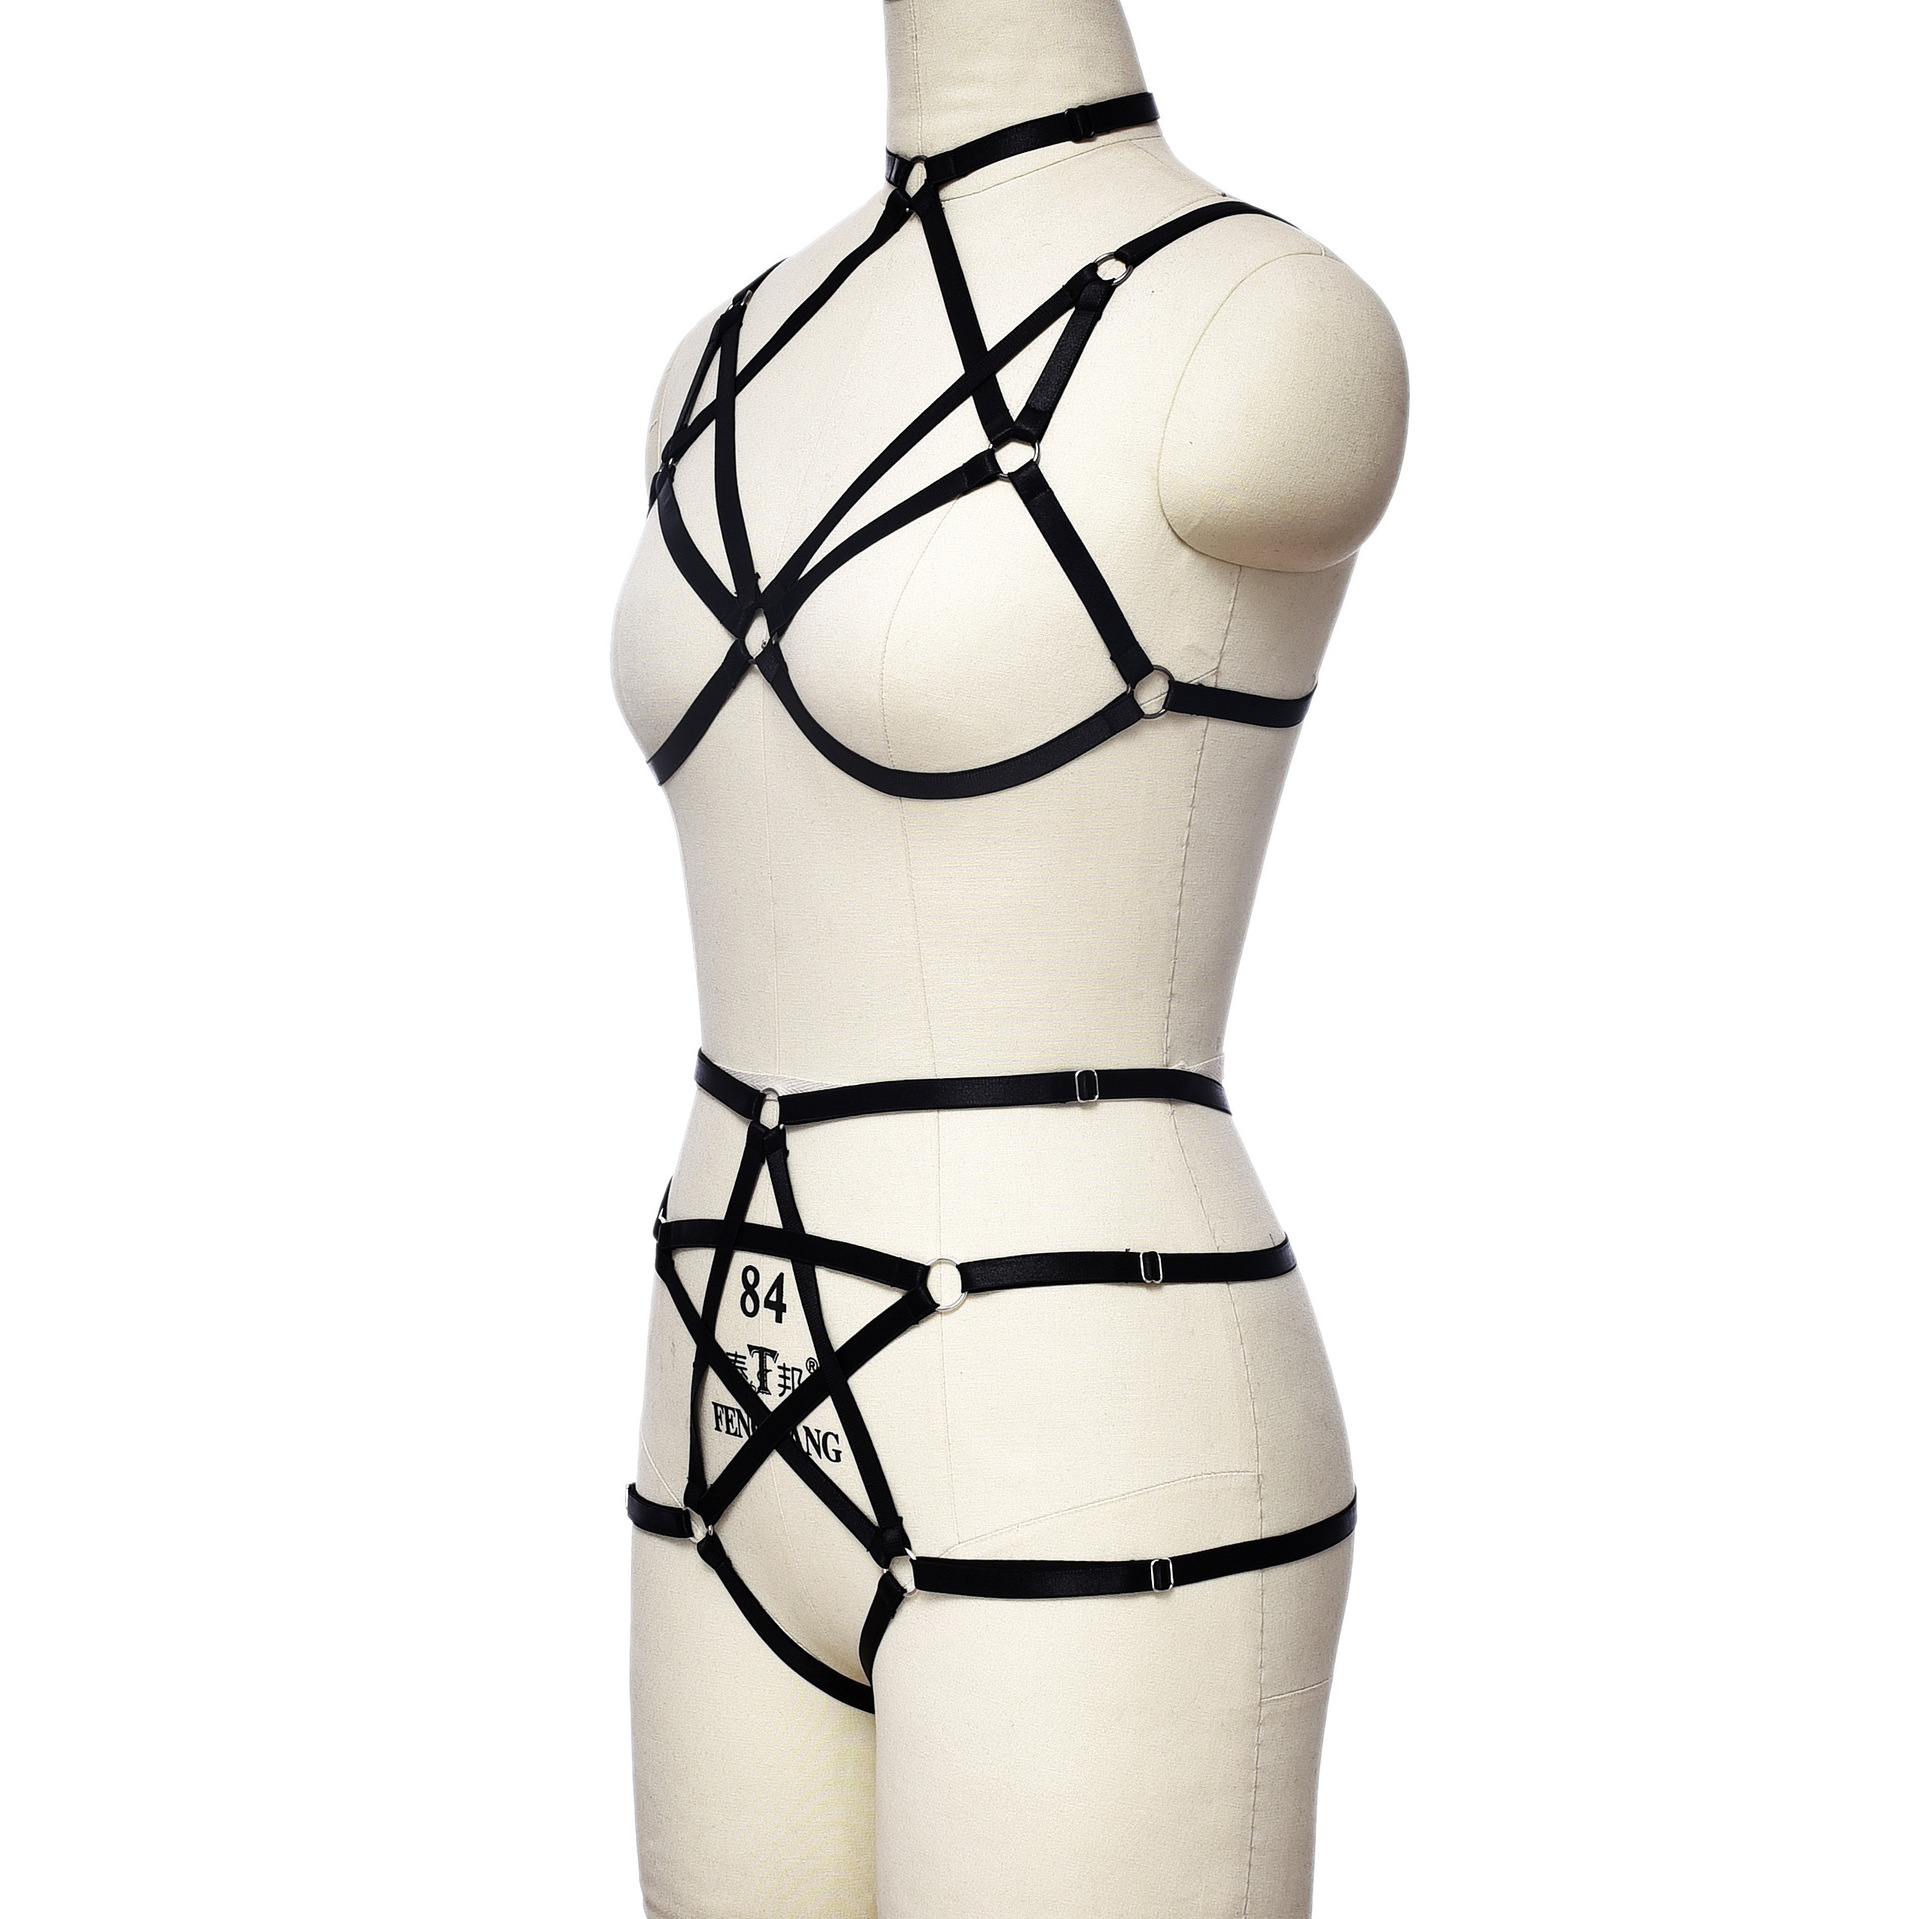 N0301-European and American wire harness five-pointed star binding black women's sexy lingerie set